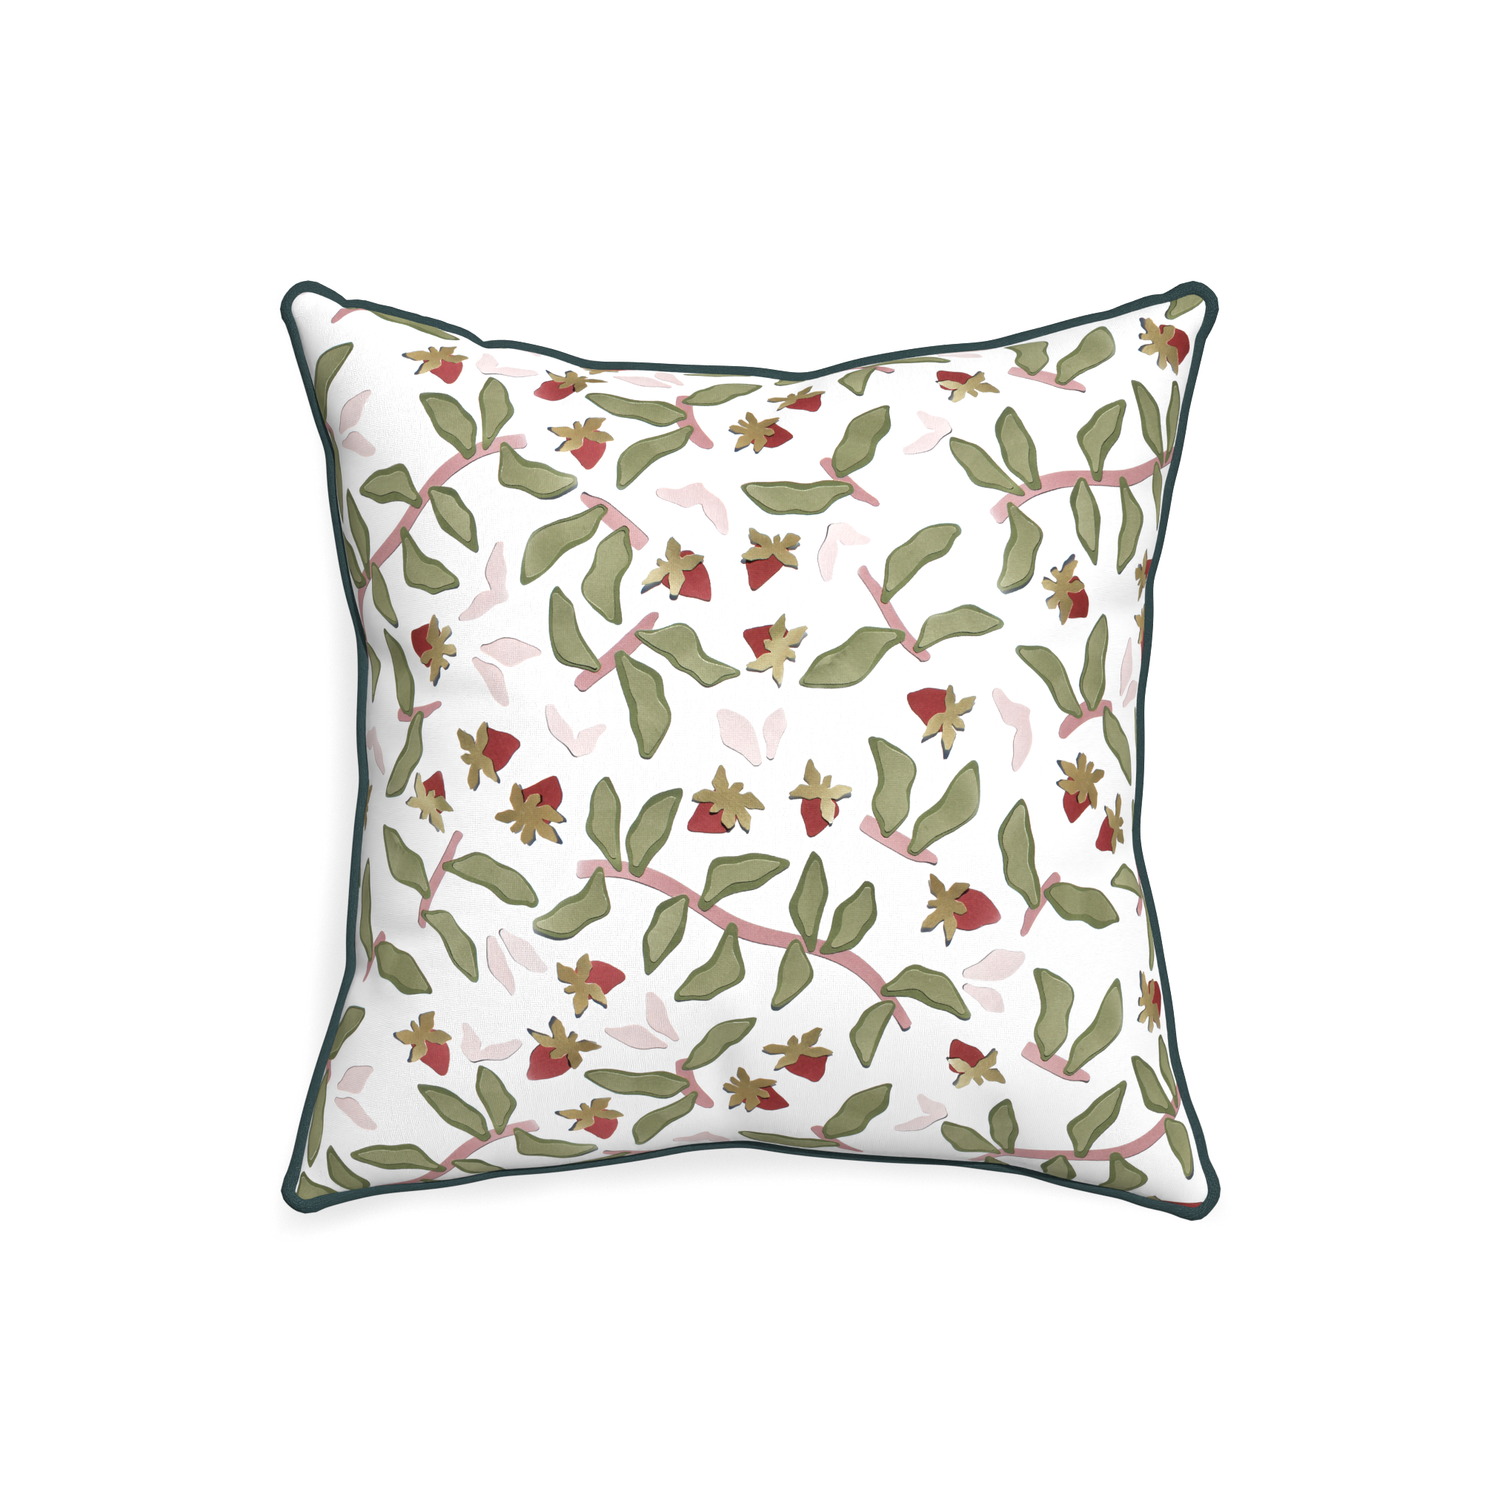 20-square nellie custom strawberry & botanicalpillow with p piping on white background